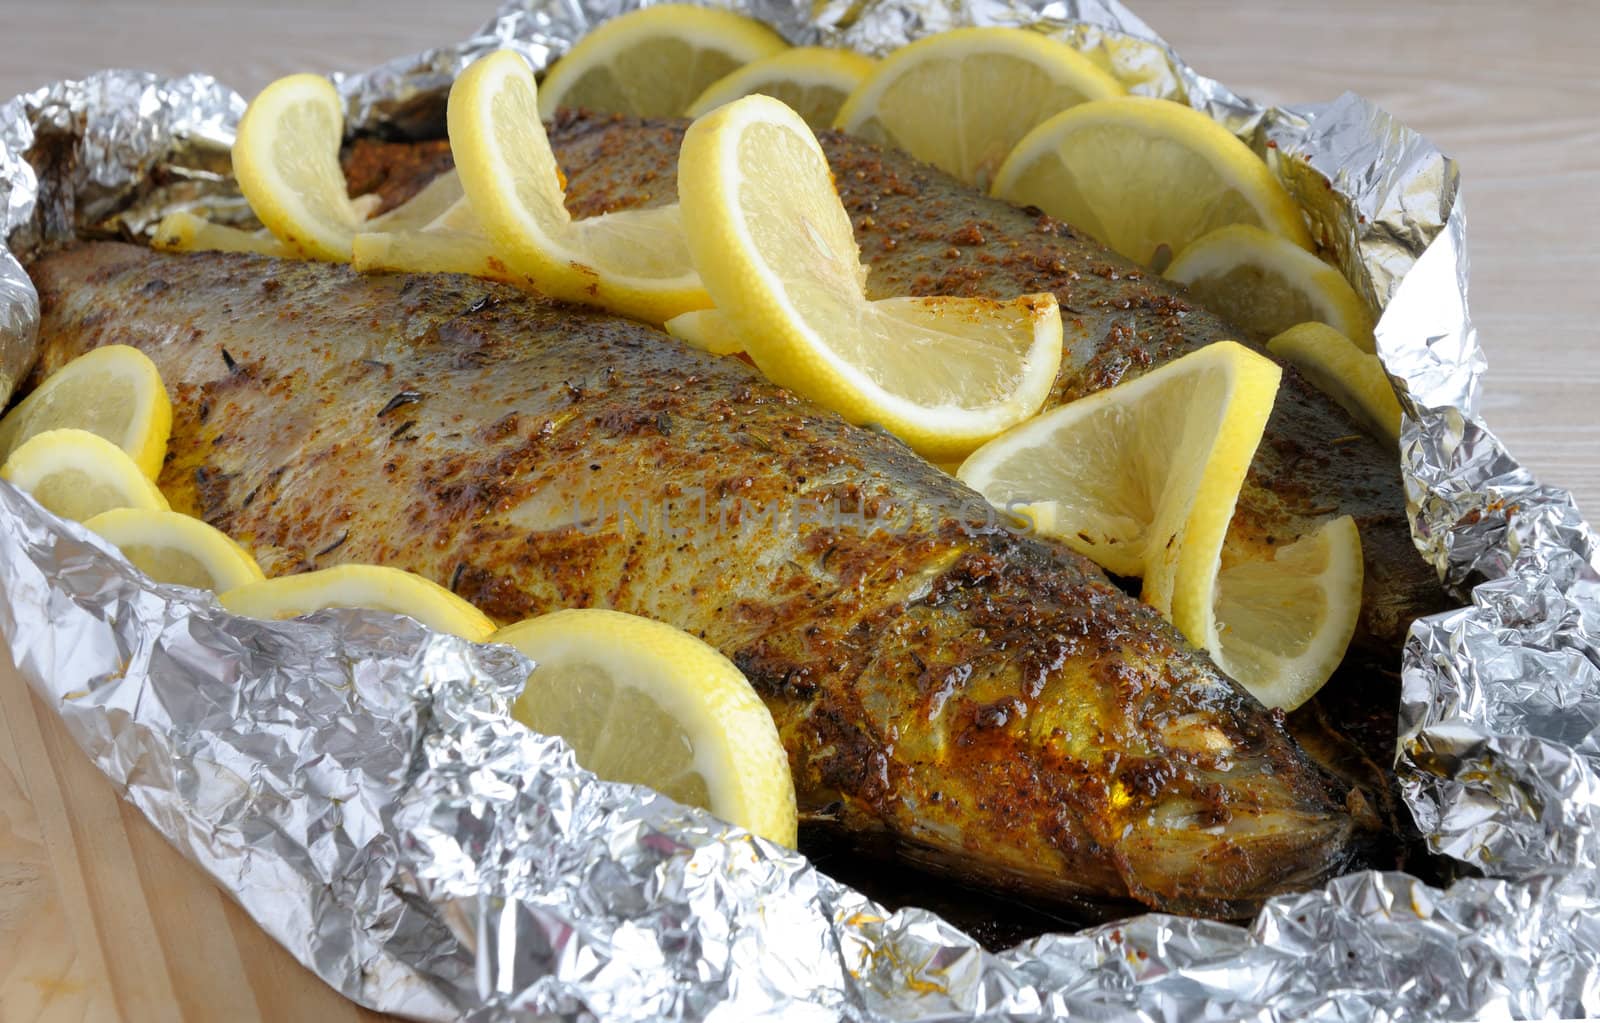 Baked herring in spices and herbs in foil by Apolonia